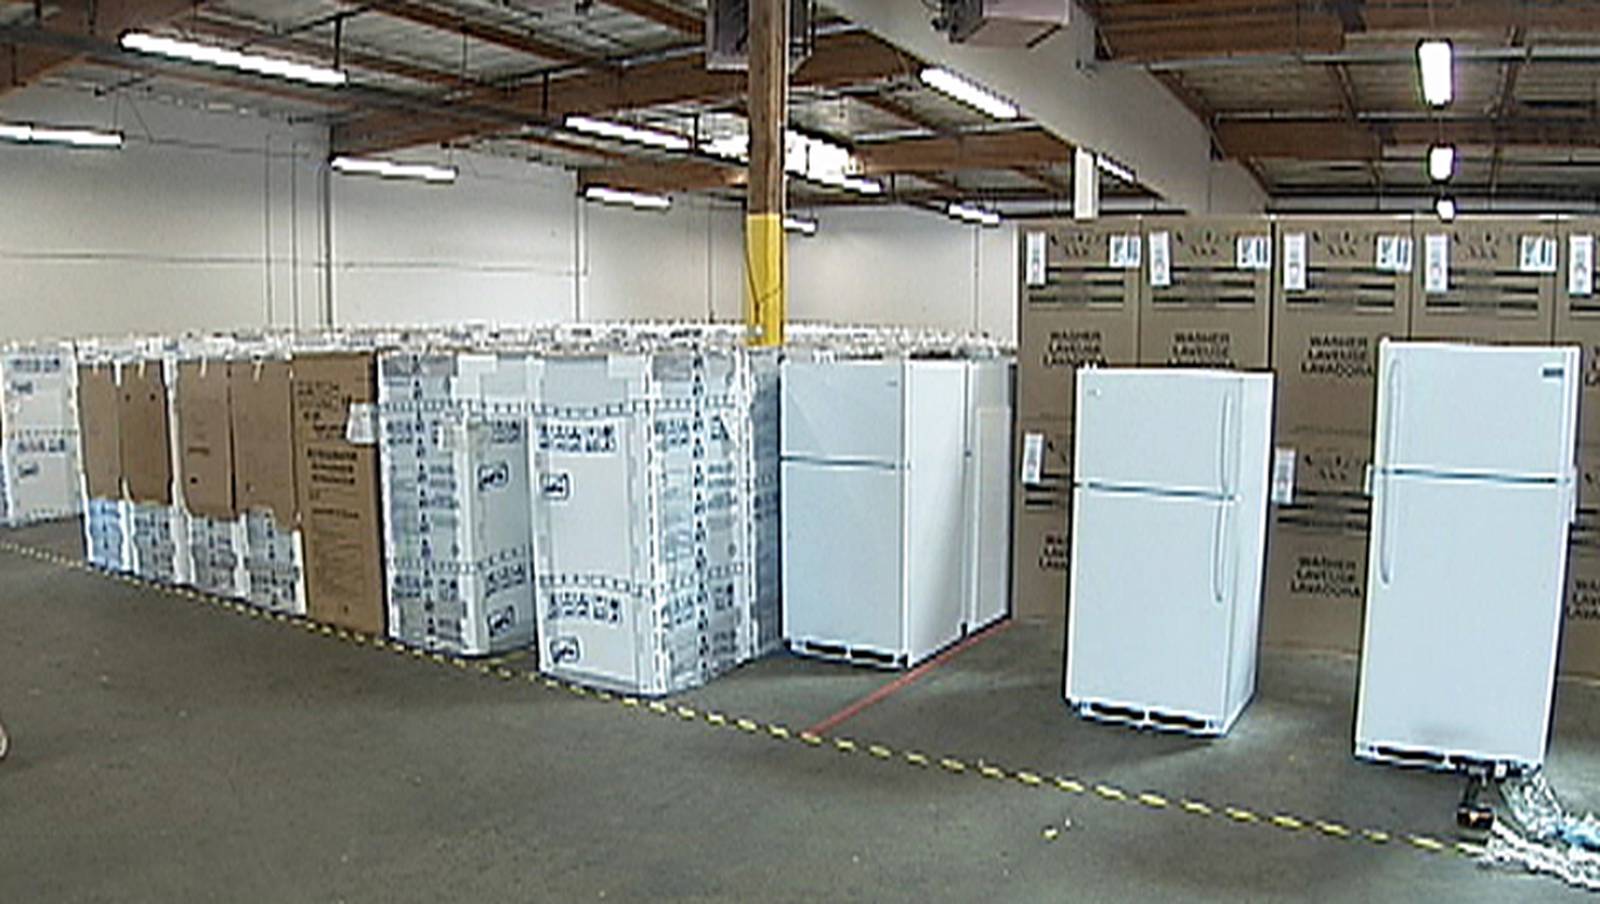 puget-sound-energy-offers-customers-free-energy-efficient-refrigerators